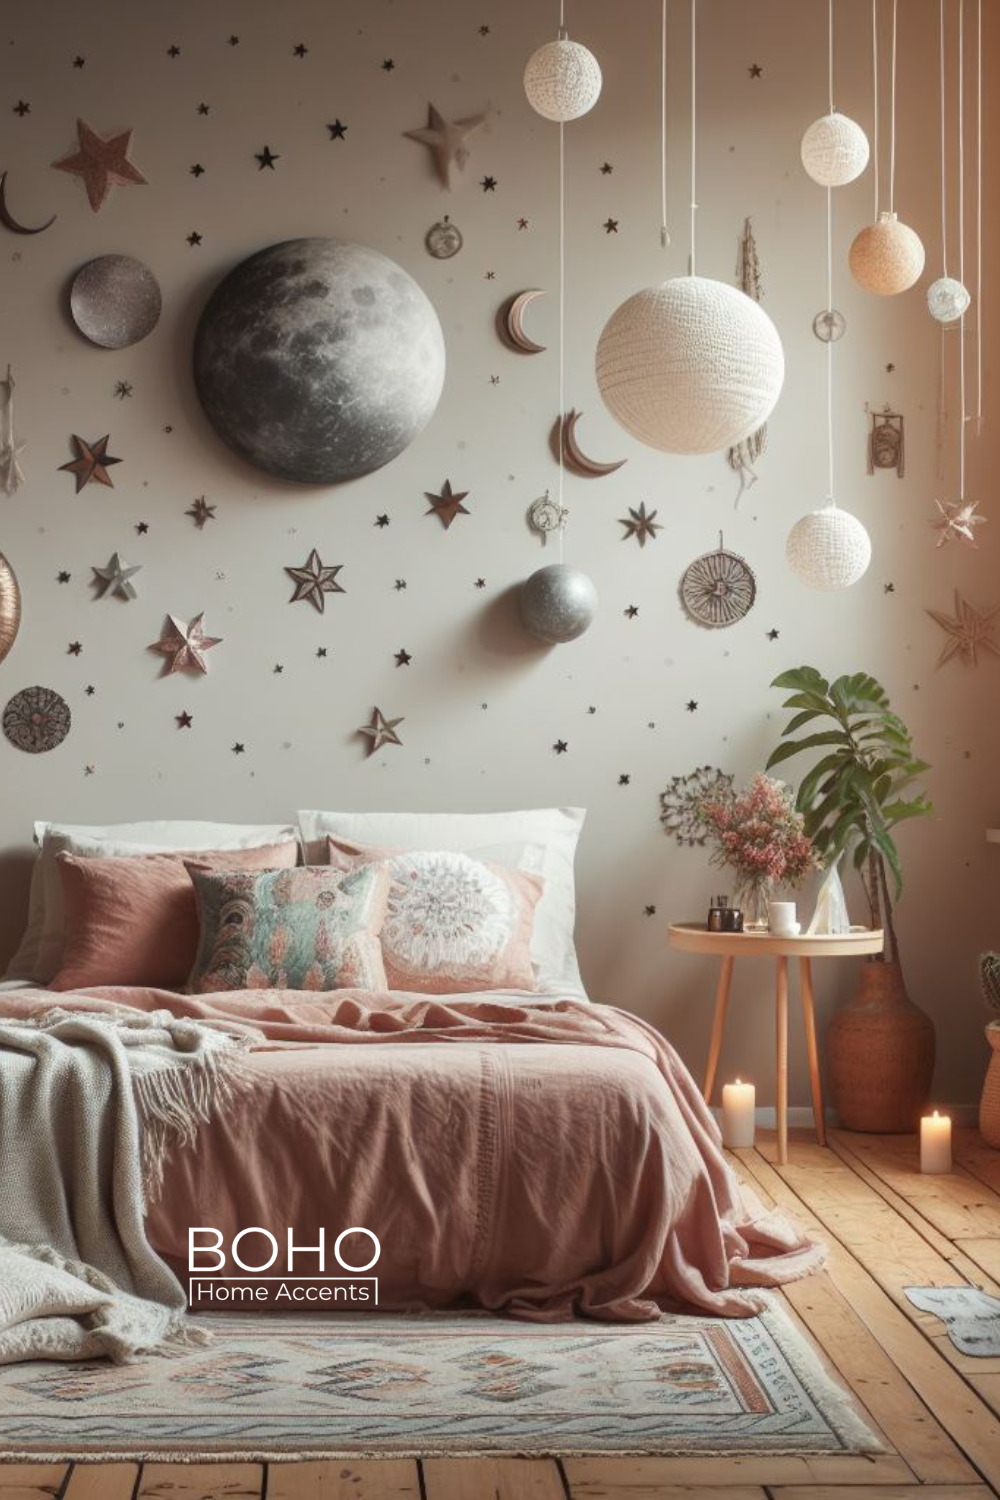 How do I make my room space themed?